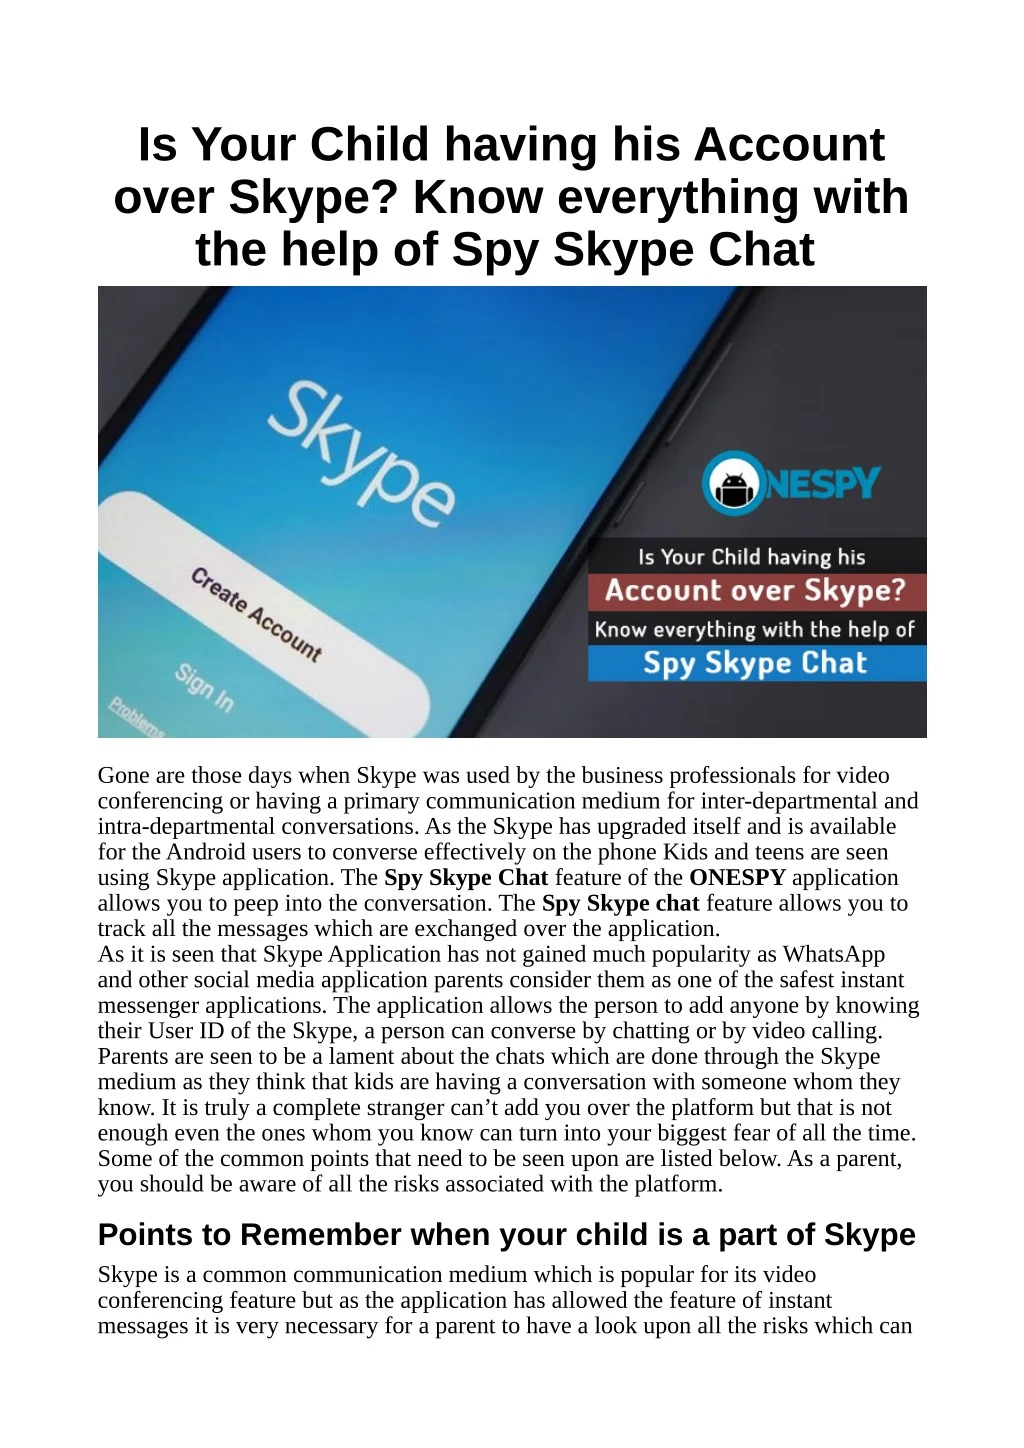 is your child having his account over skype know